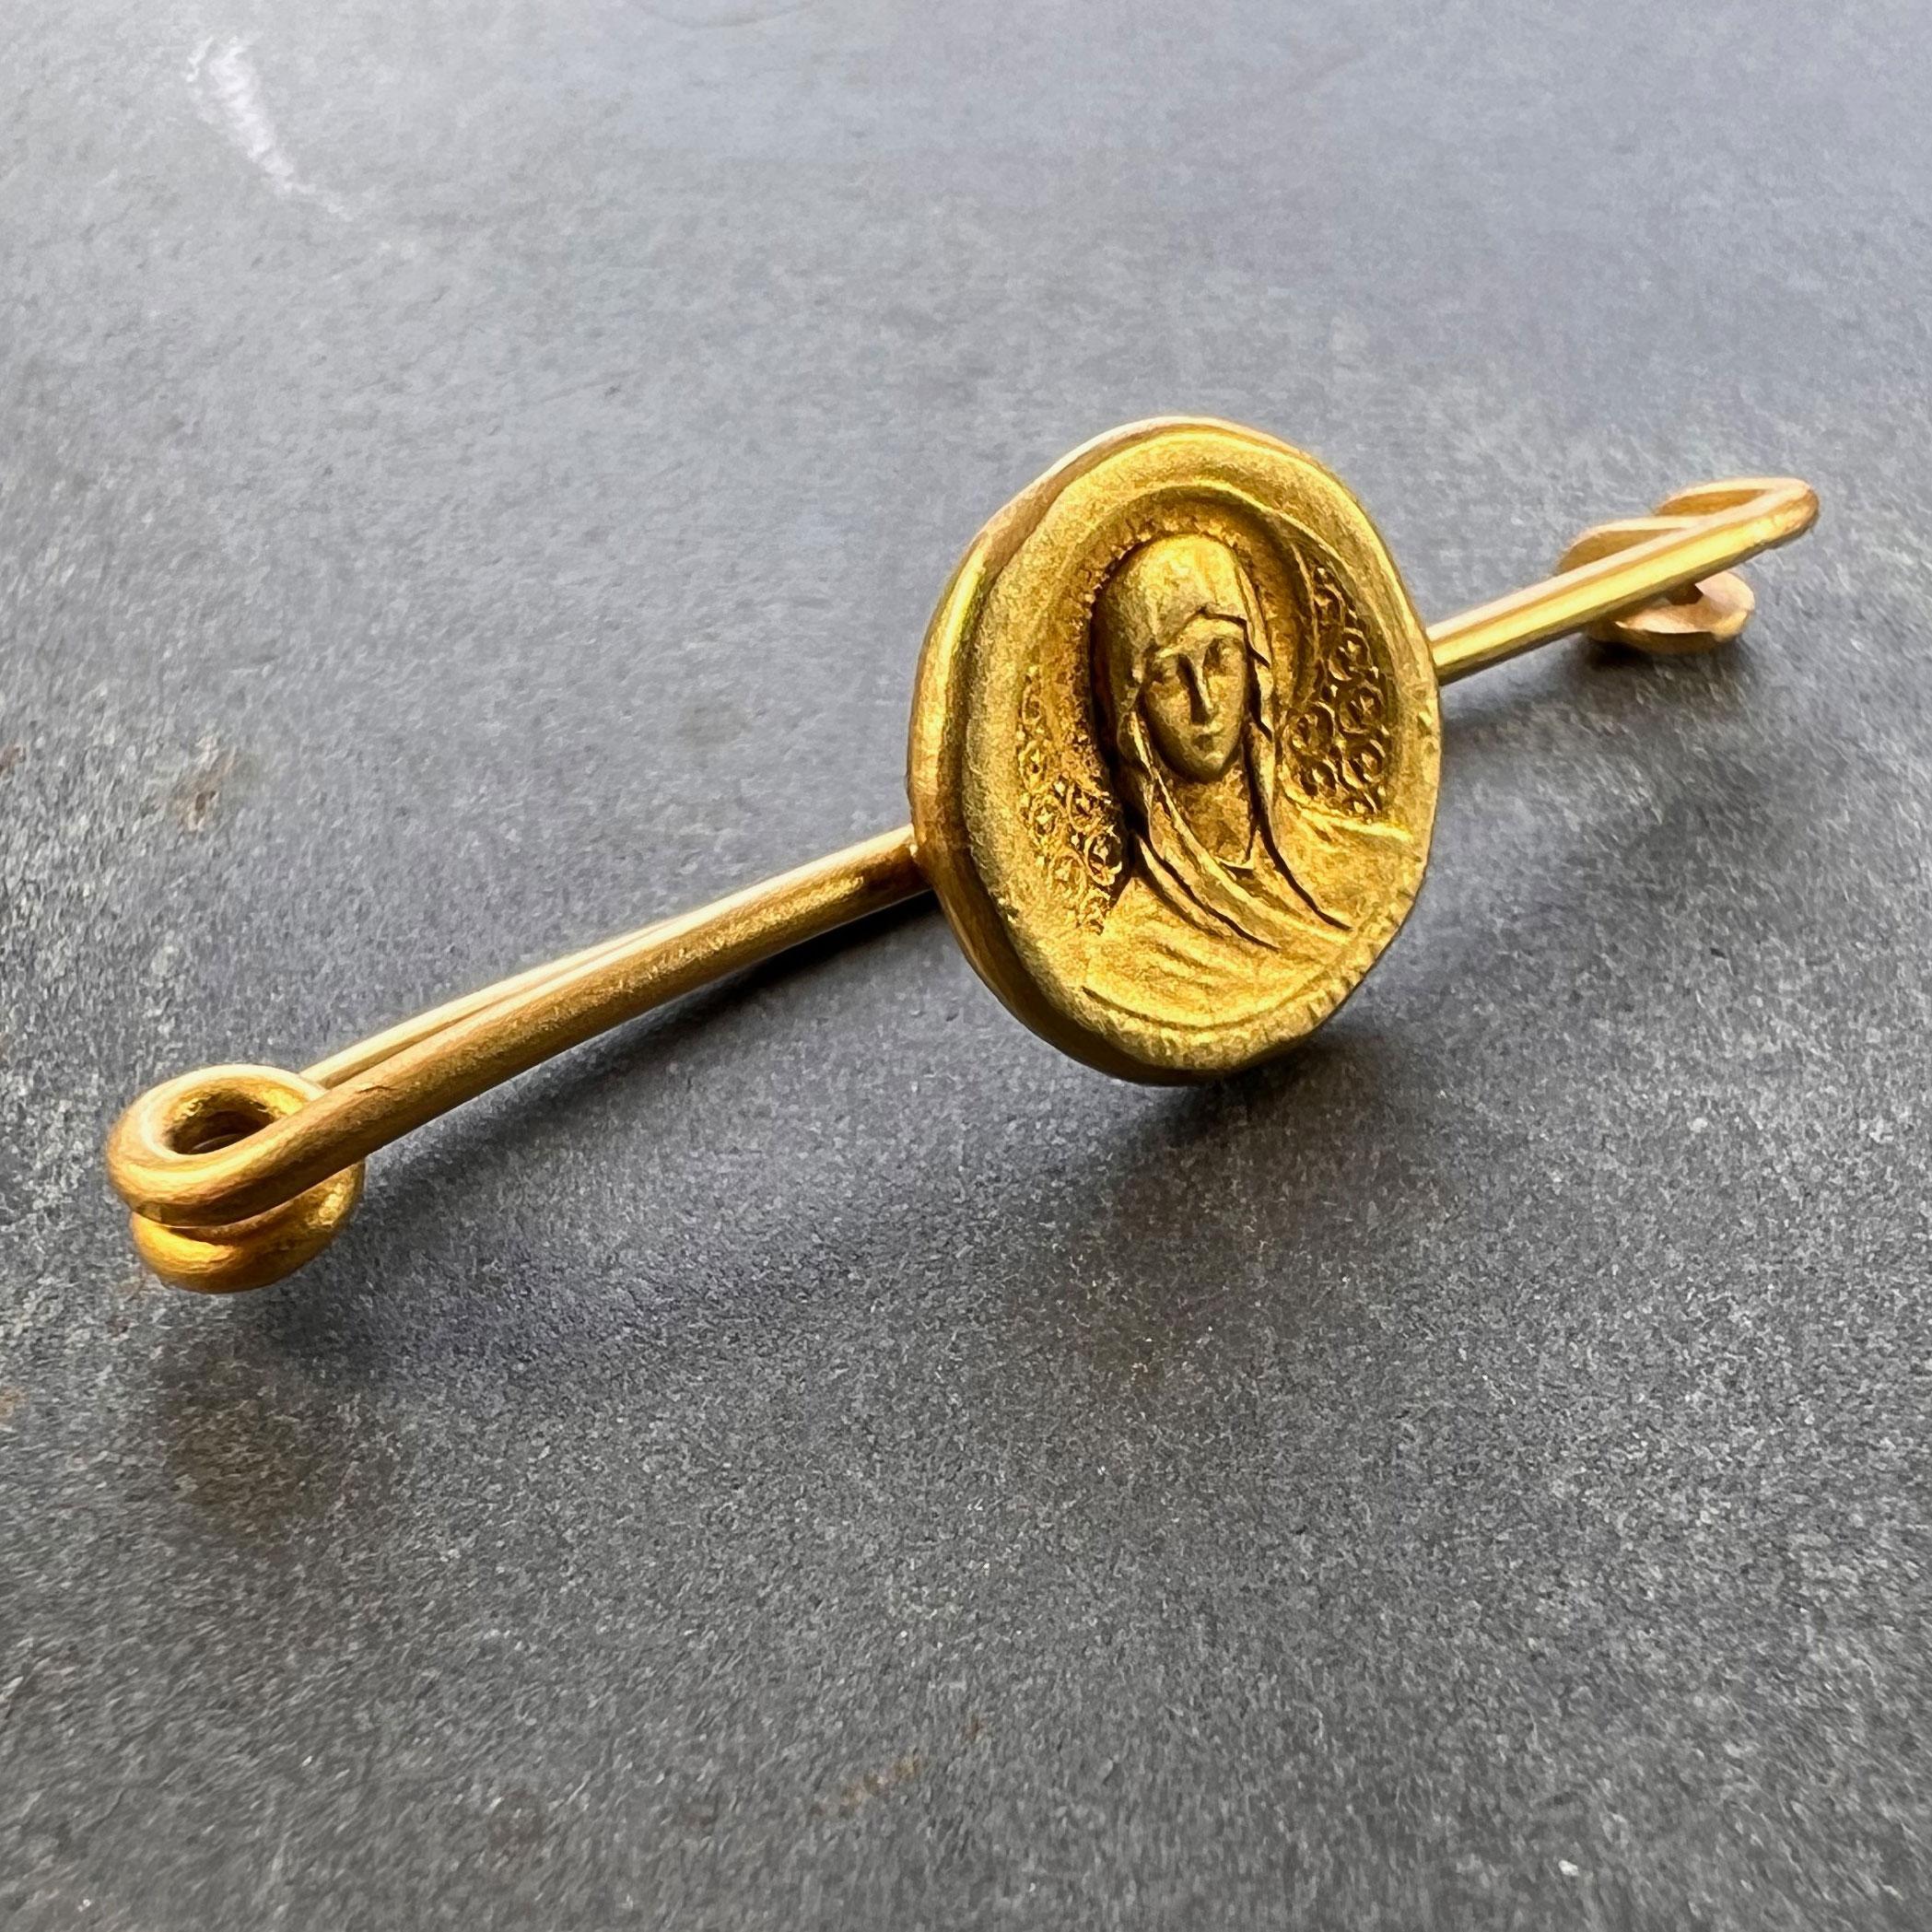 An 18 karat (18K) yellow gold pin brooch of a medal depicting the Virgin Mary with a halo on a repeating geometric background of encircled fleur de lis, with the phrase 'Virgo Maria' below. 

The reverse depicts the Marian symbol of the entwined